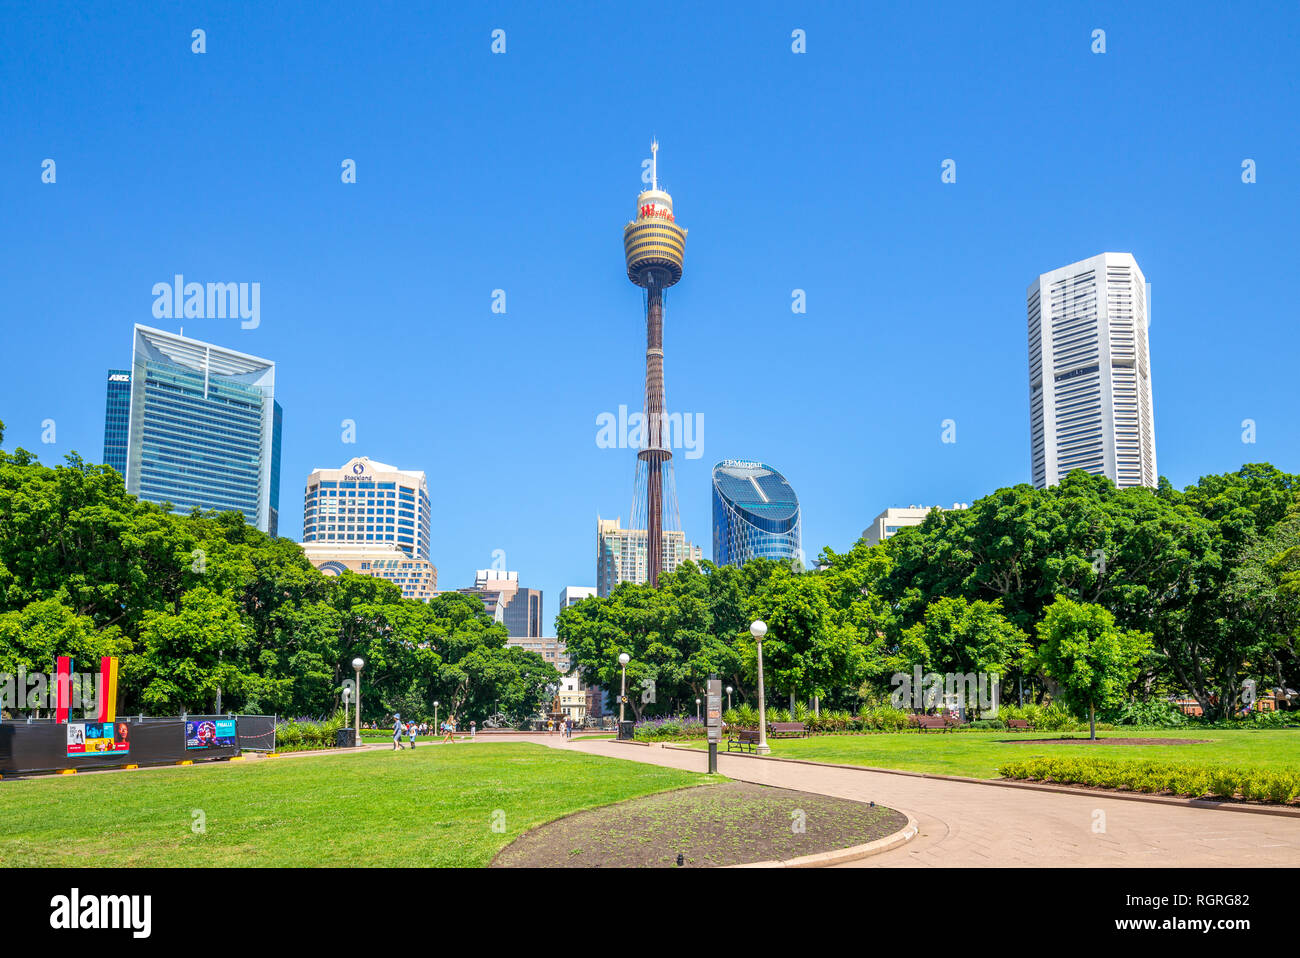 Sydney, Australia - January 5, 2019: sydney tower and hyde park. Sydney Tower is the tallest structure in this city, and Hyde Park is the oldest publi Stock Photo